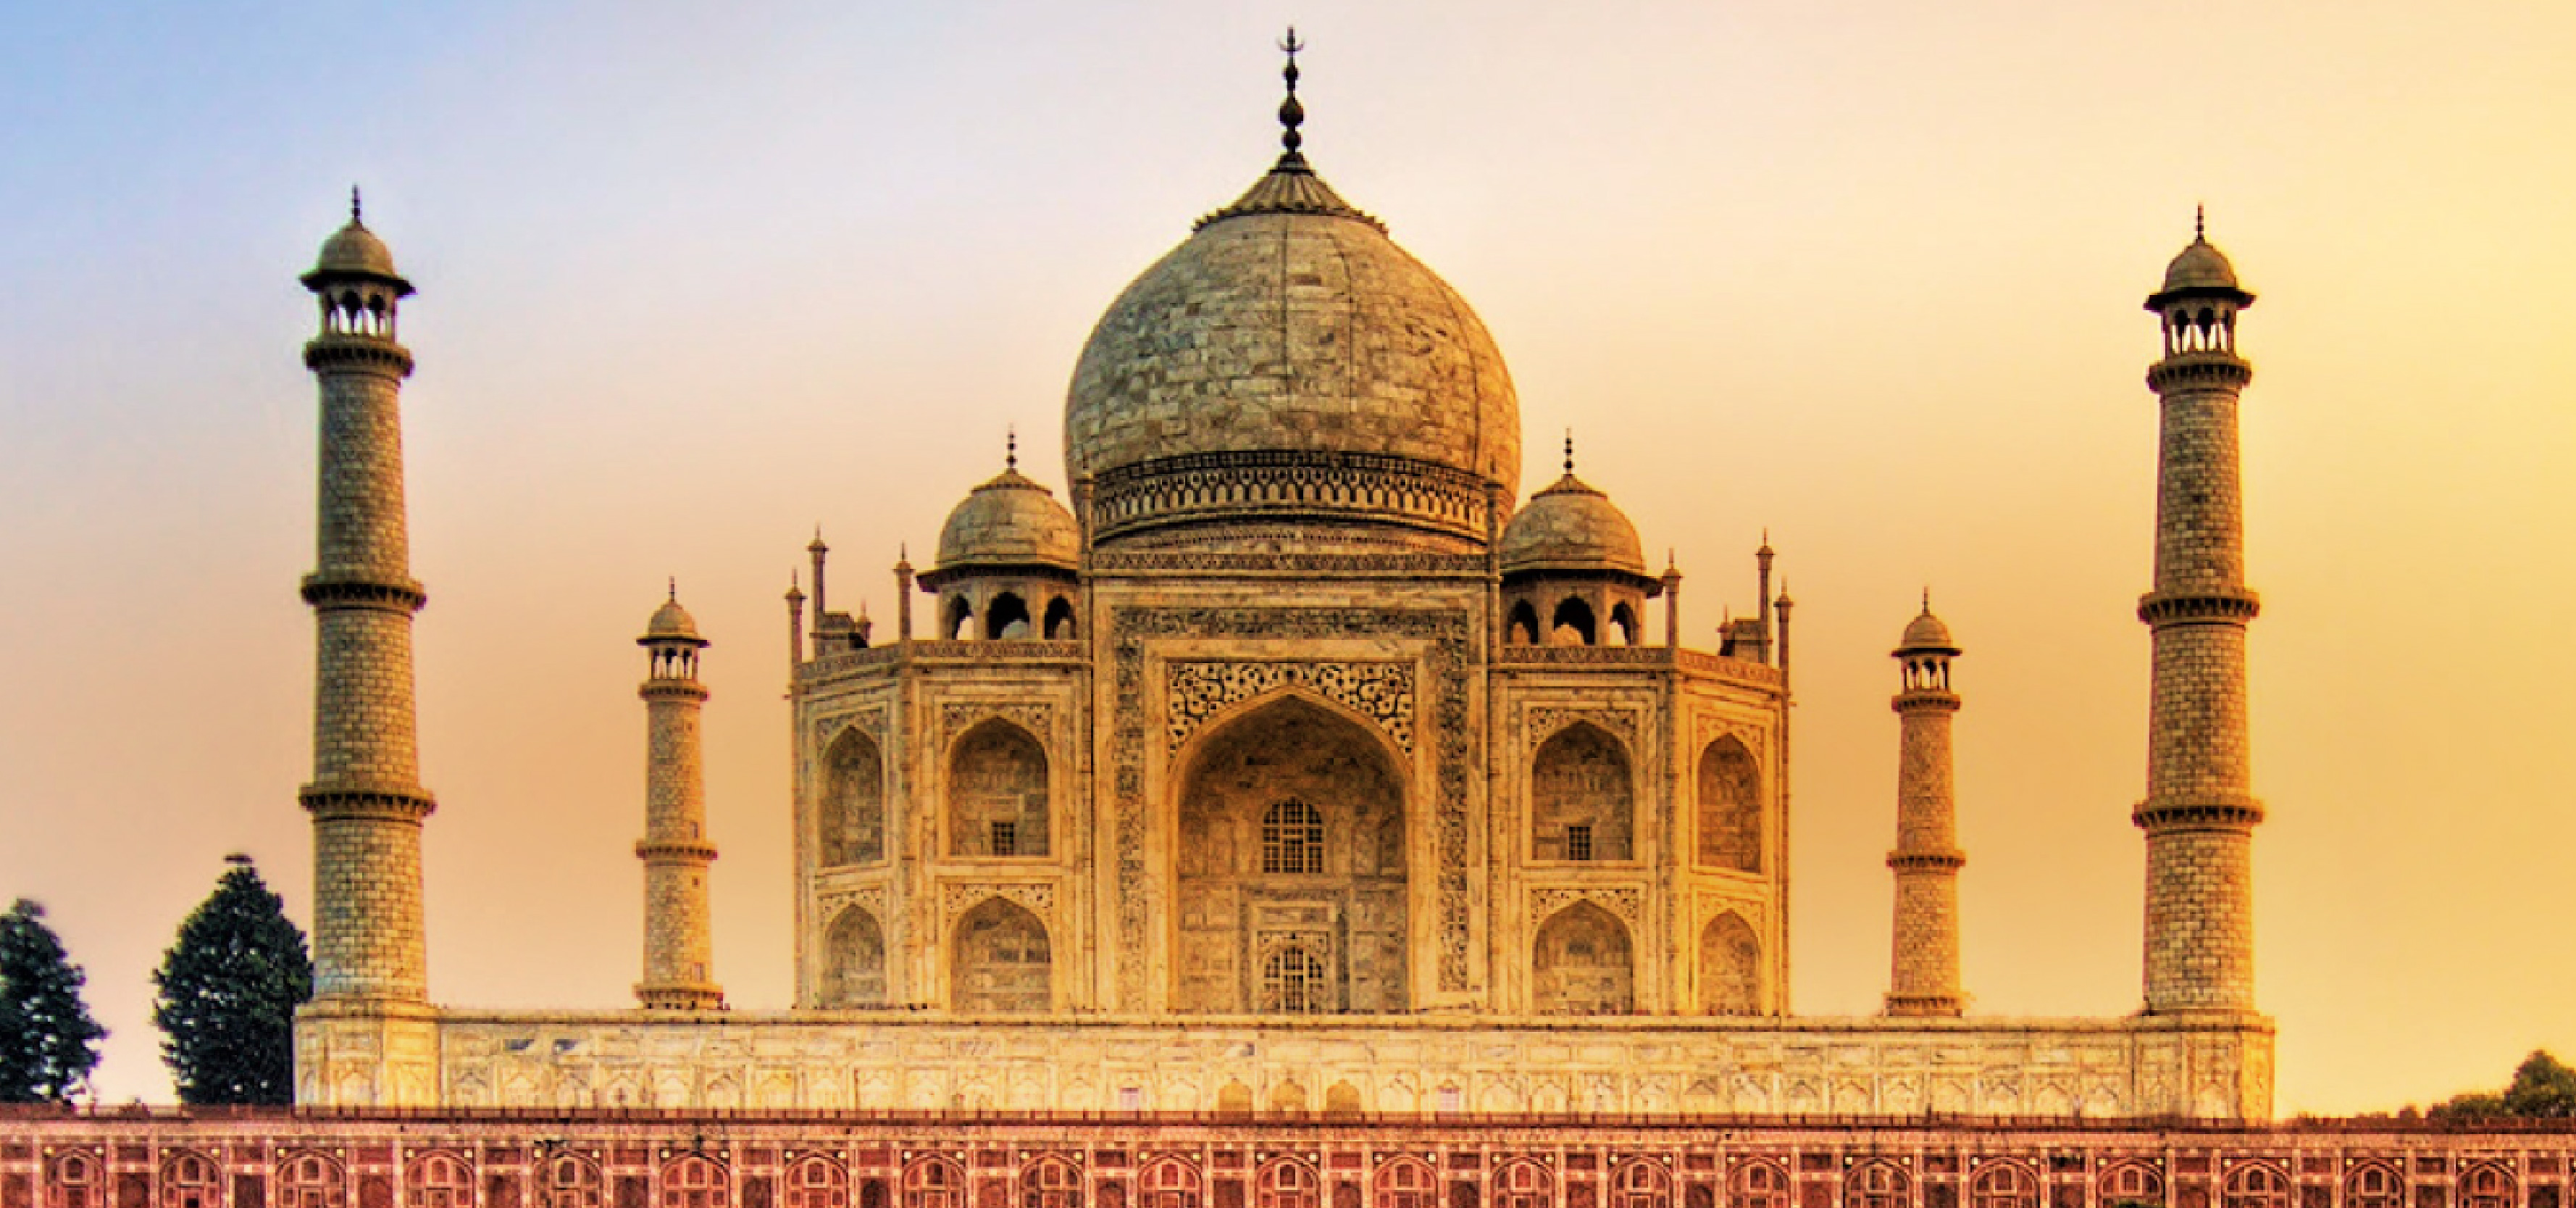 Explore India with these special rates and packages. This program is based on a special offer from Oberoi Hotels.